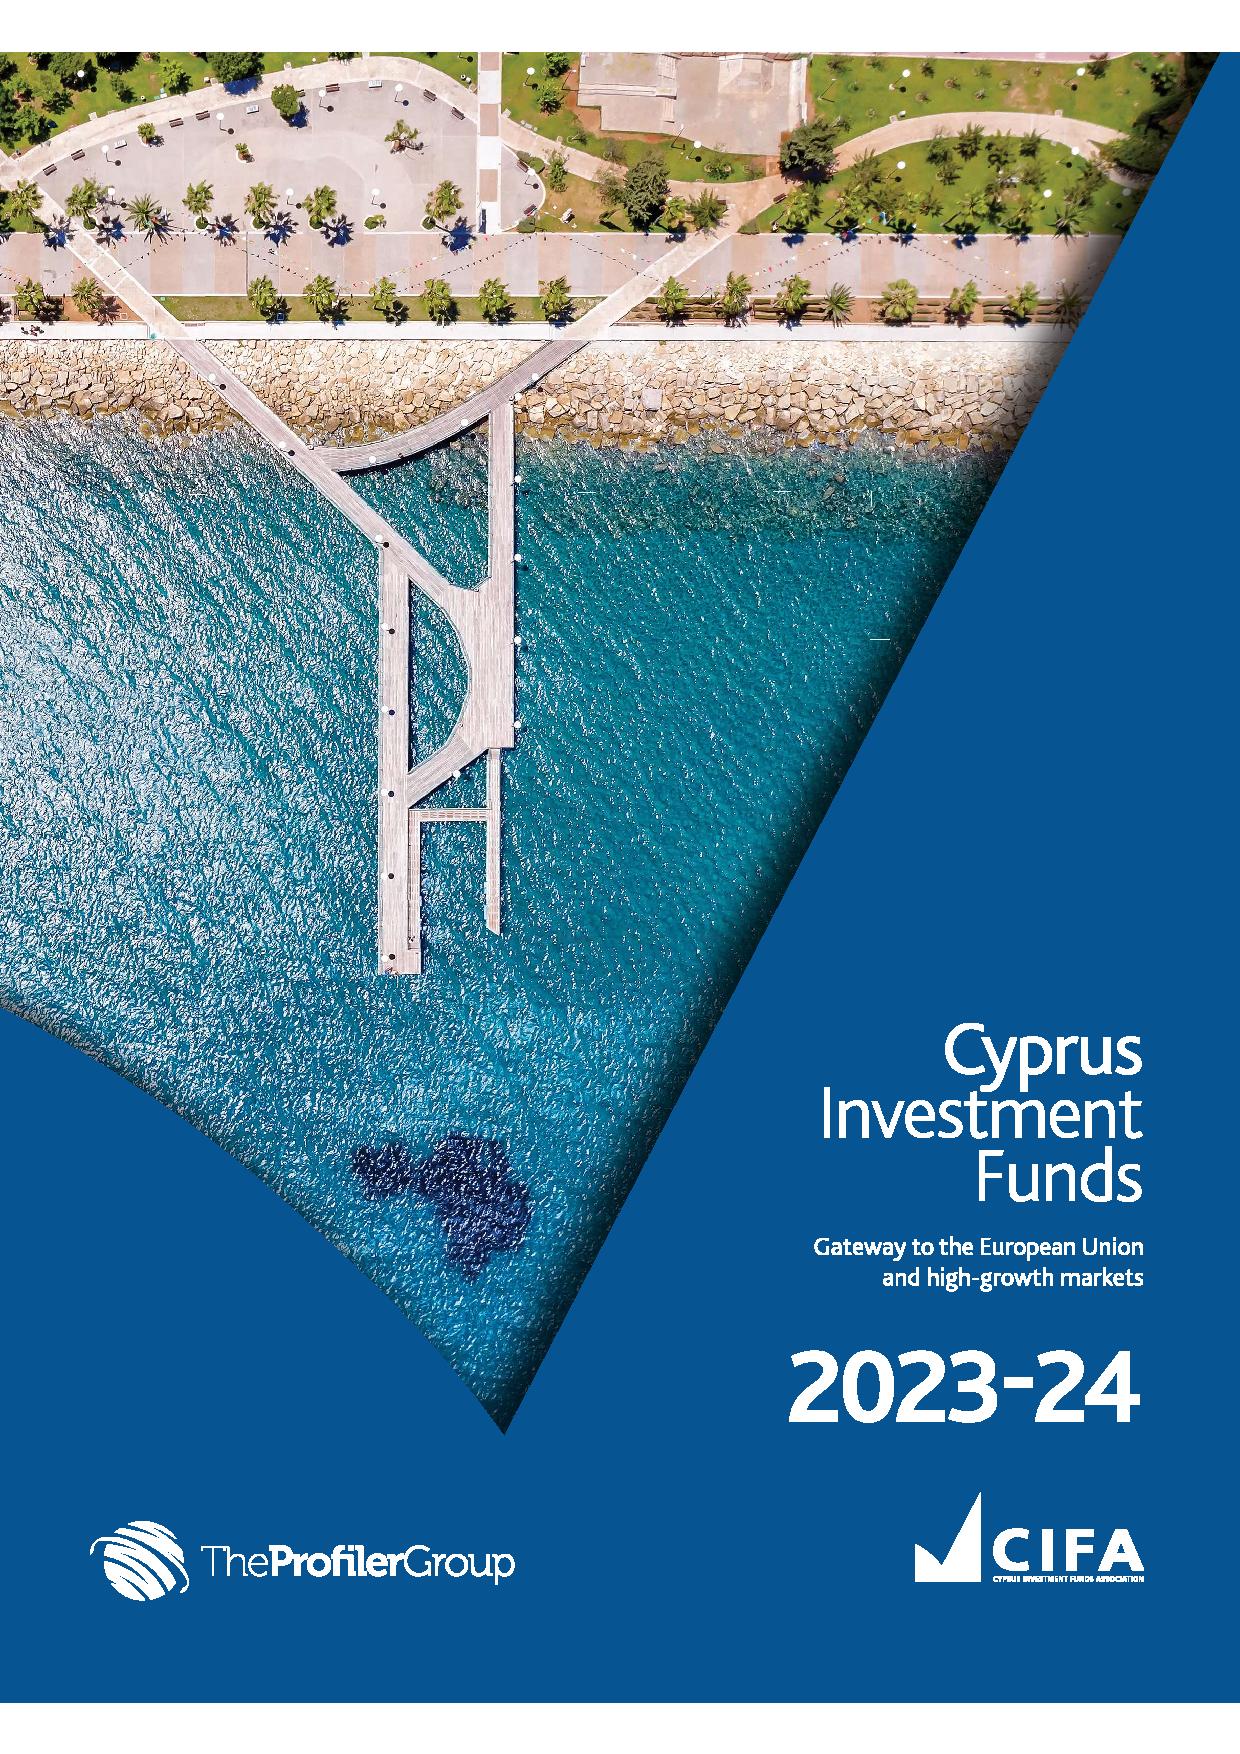 CIFA Investment Funds Guide 2023-2024